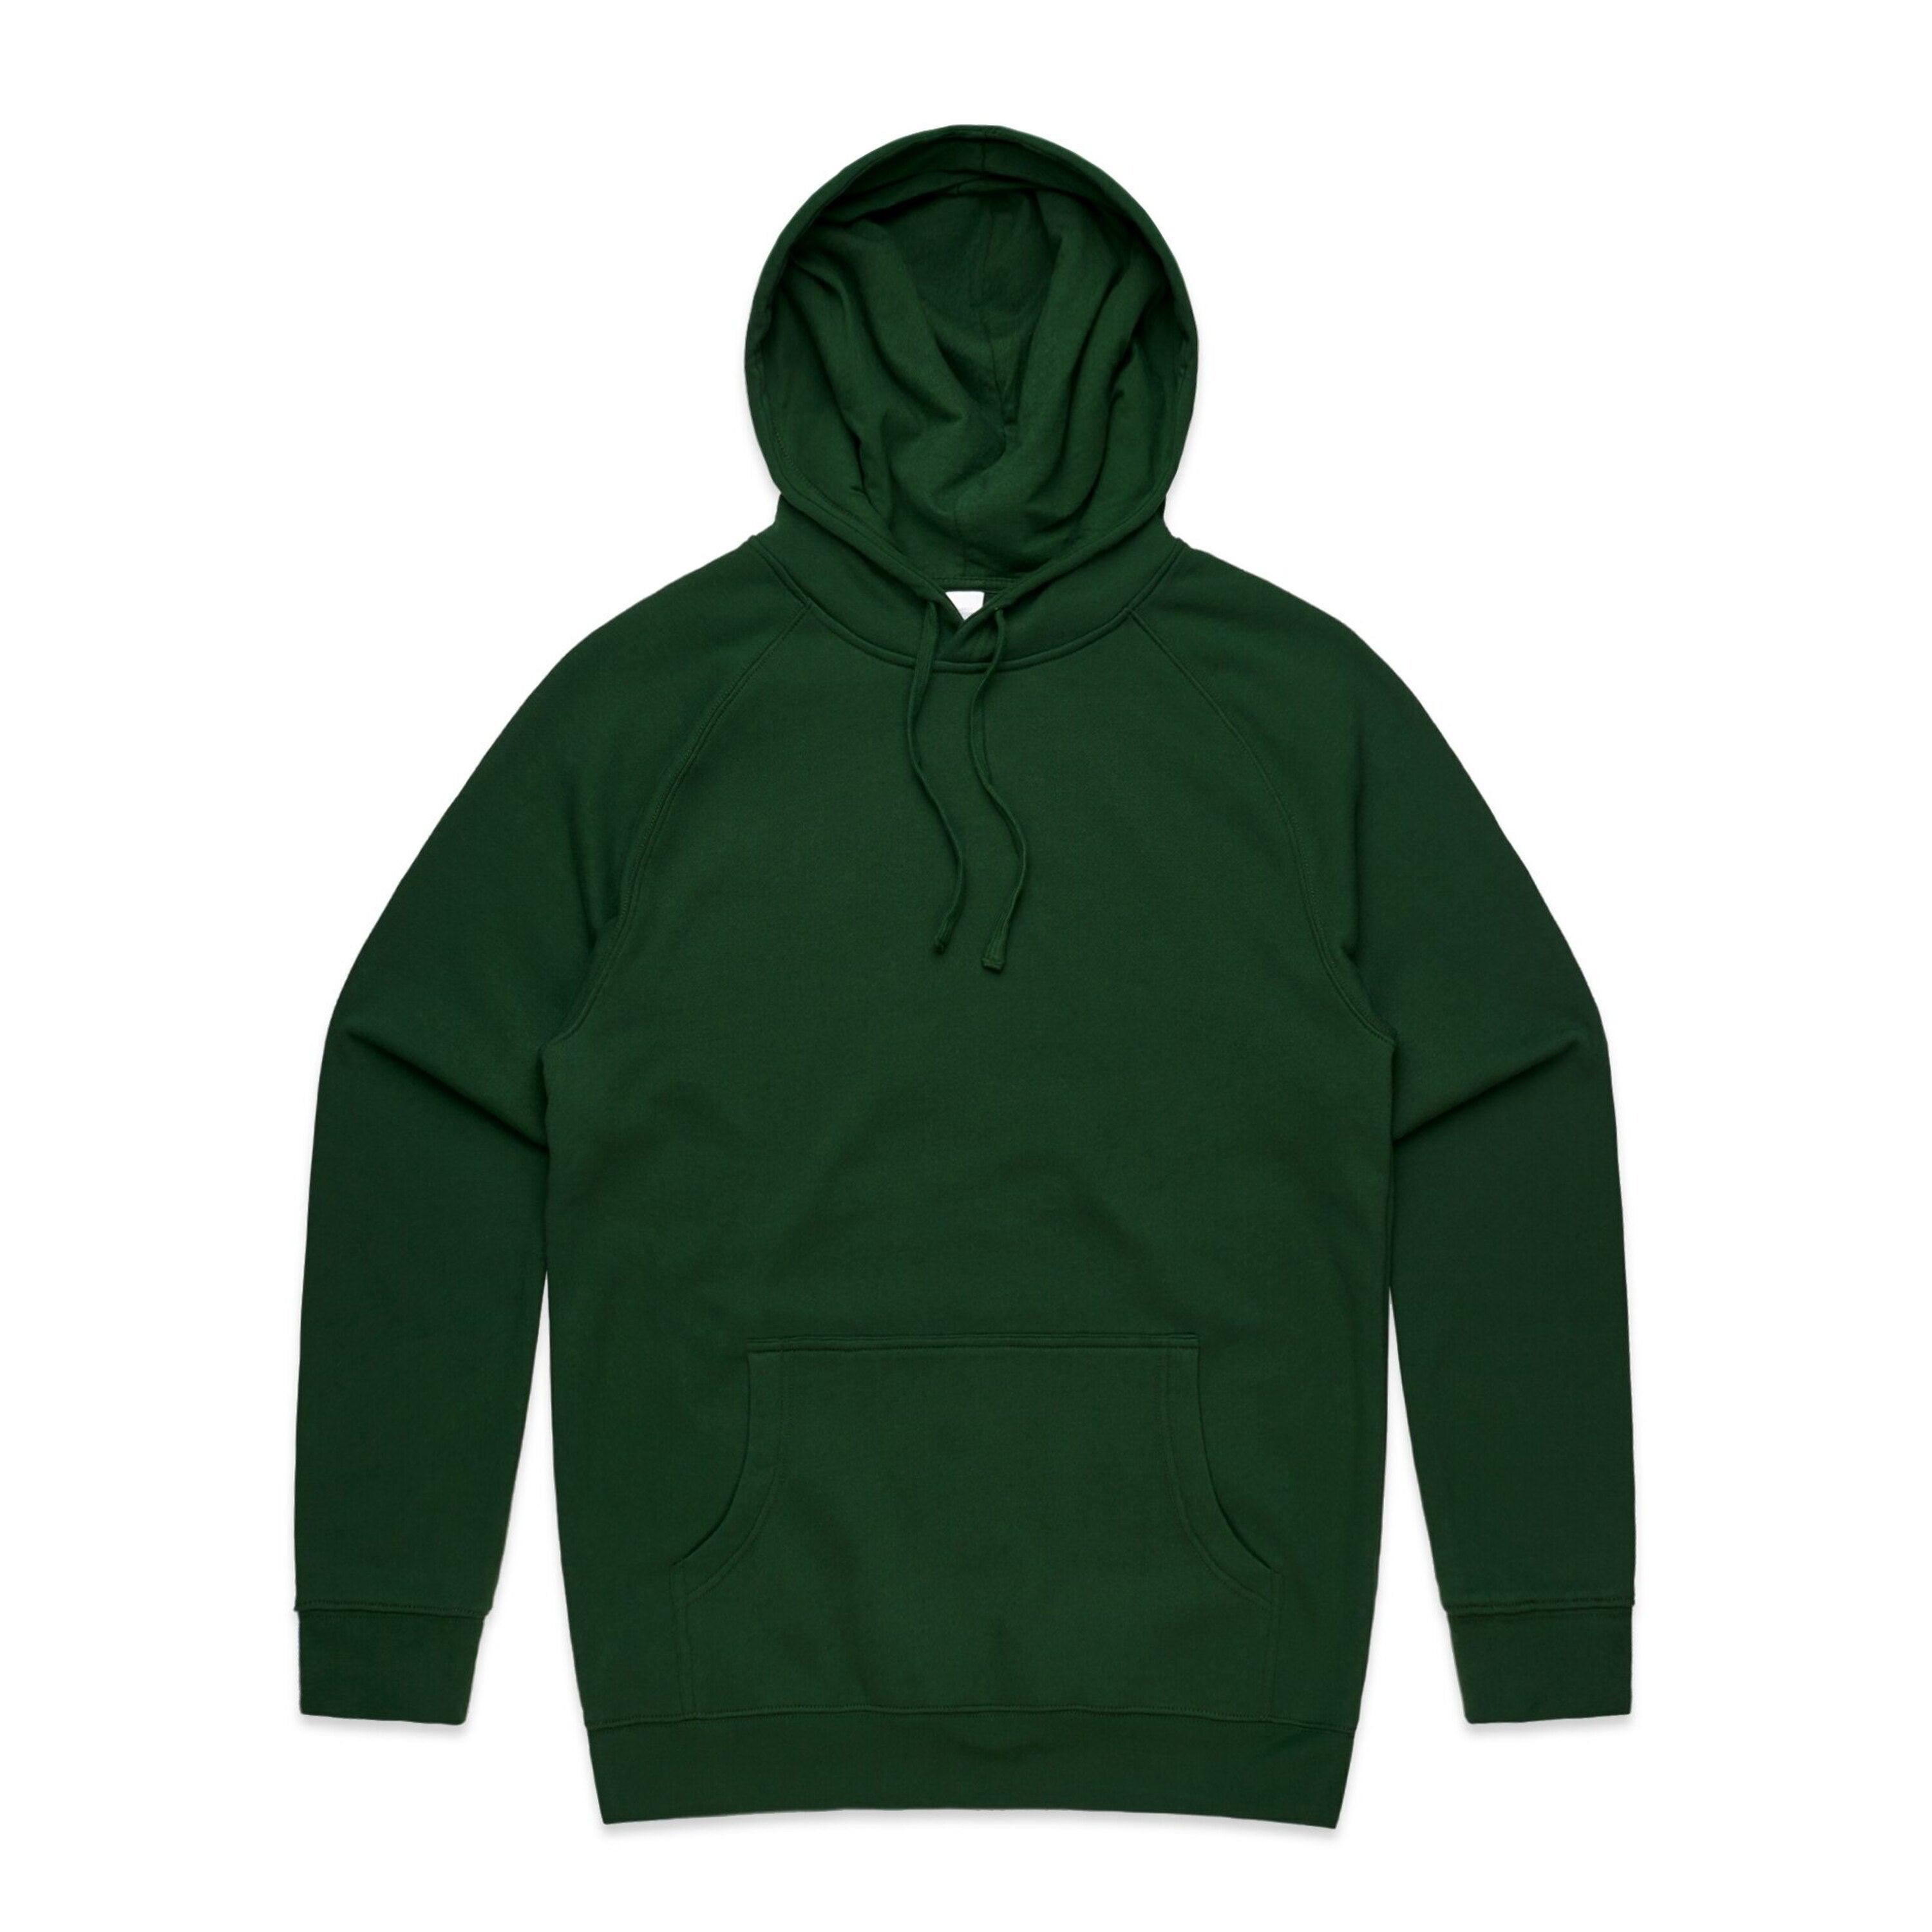 MENS SUPPLY HOOD - Colortex Screen Printing & Embroidery